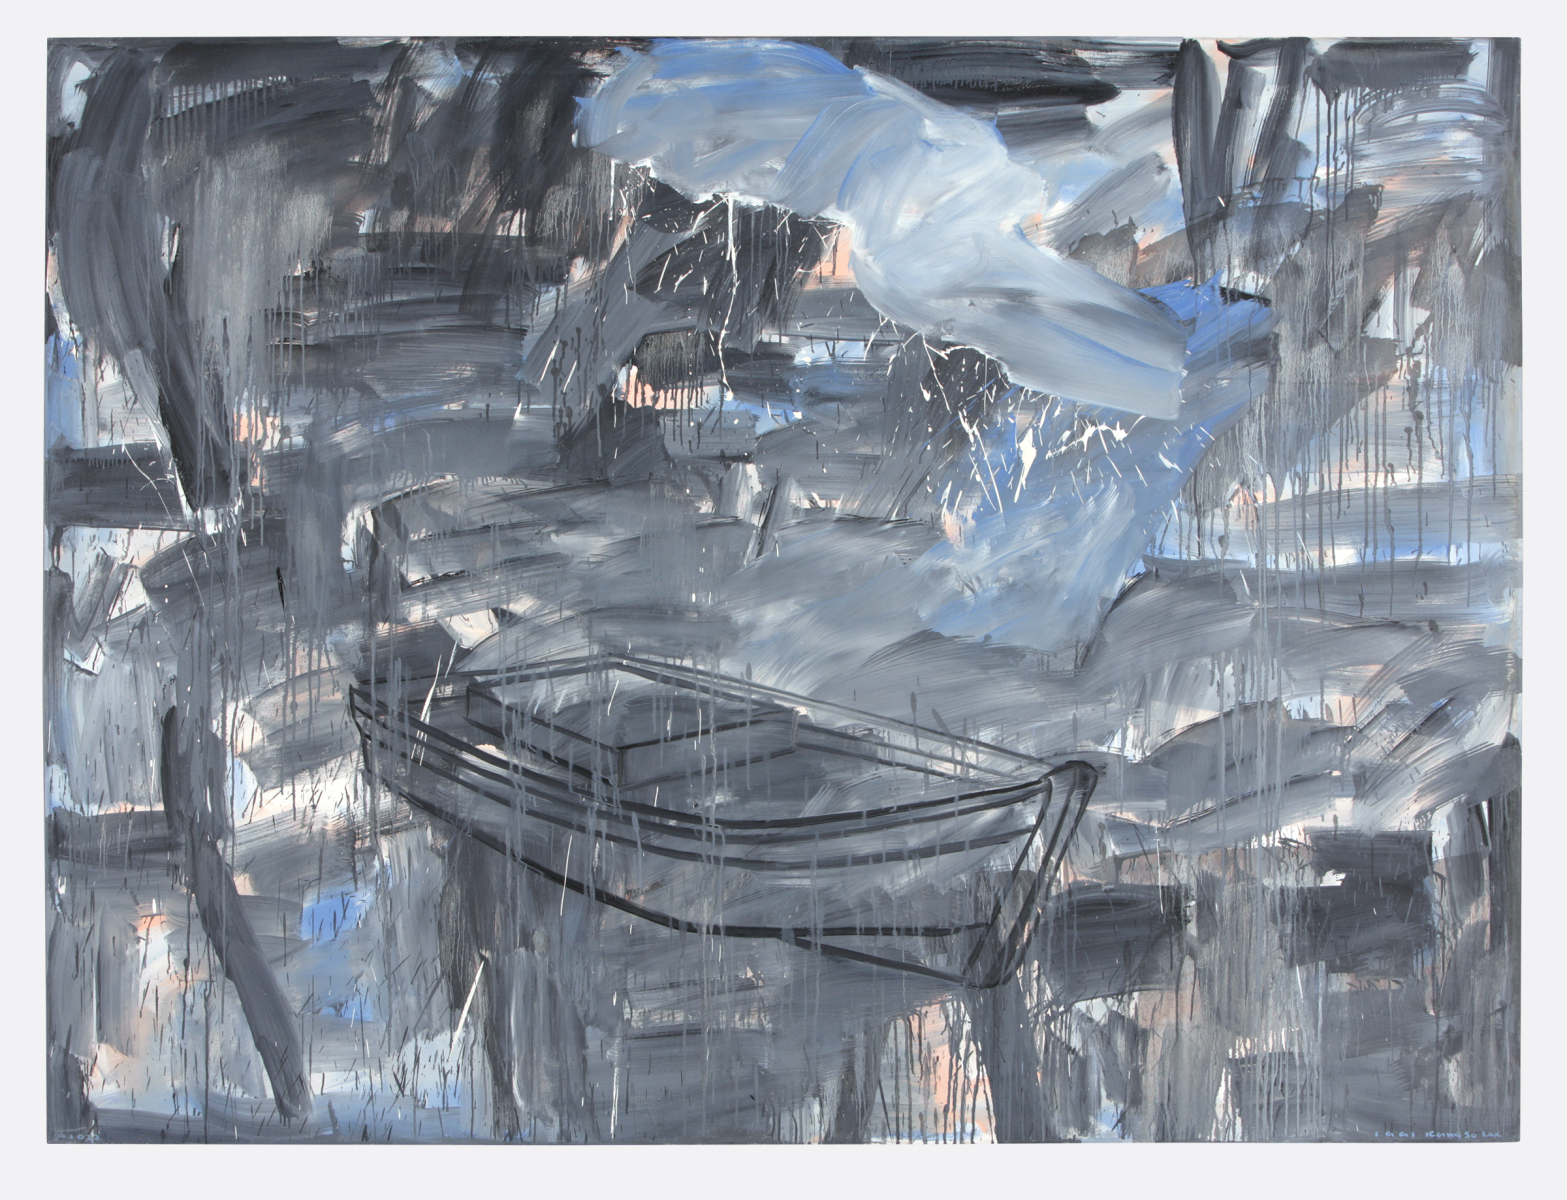 Untitled-91022, 1991, Oil on Canvas, 194x259cm